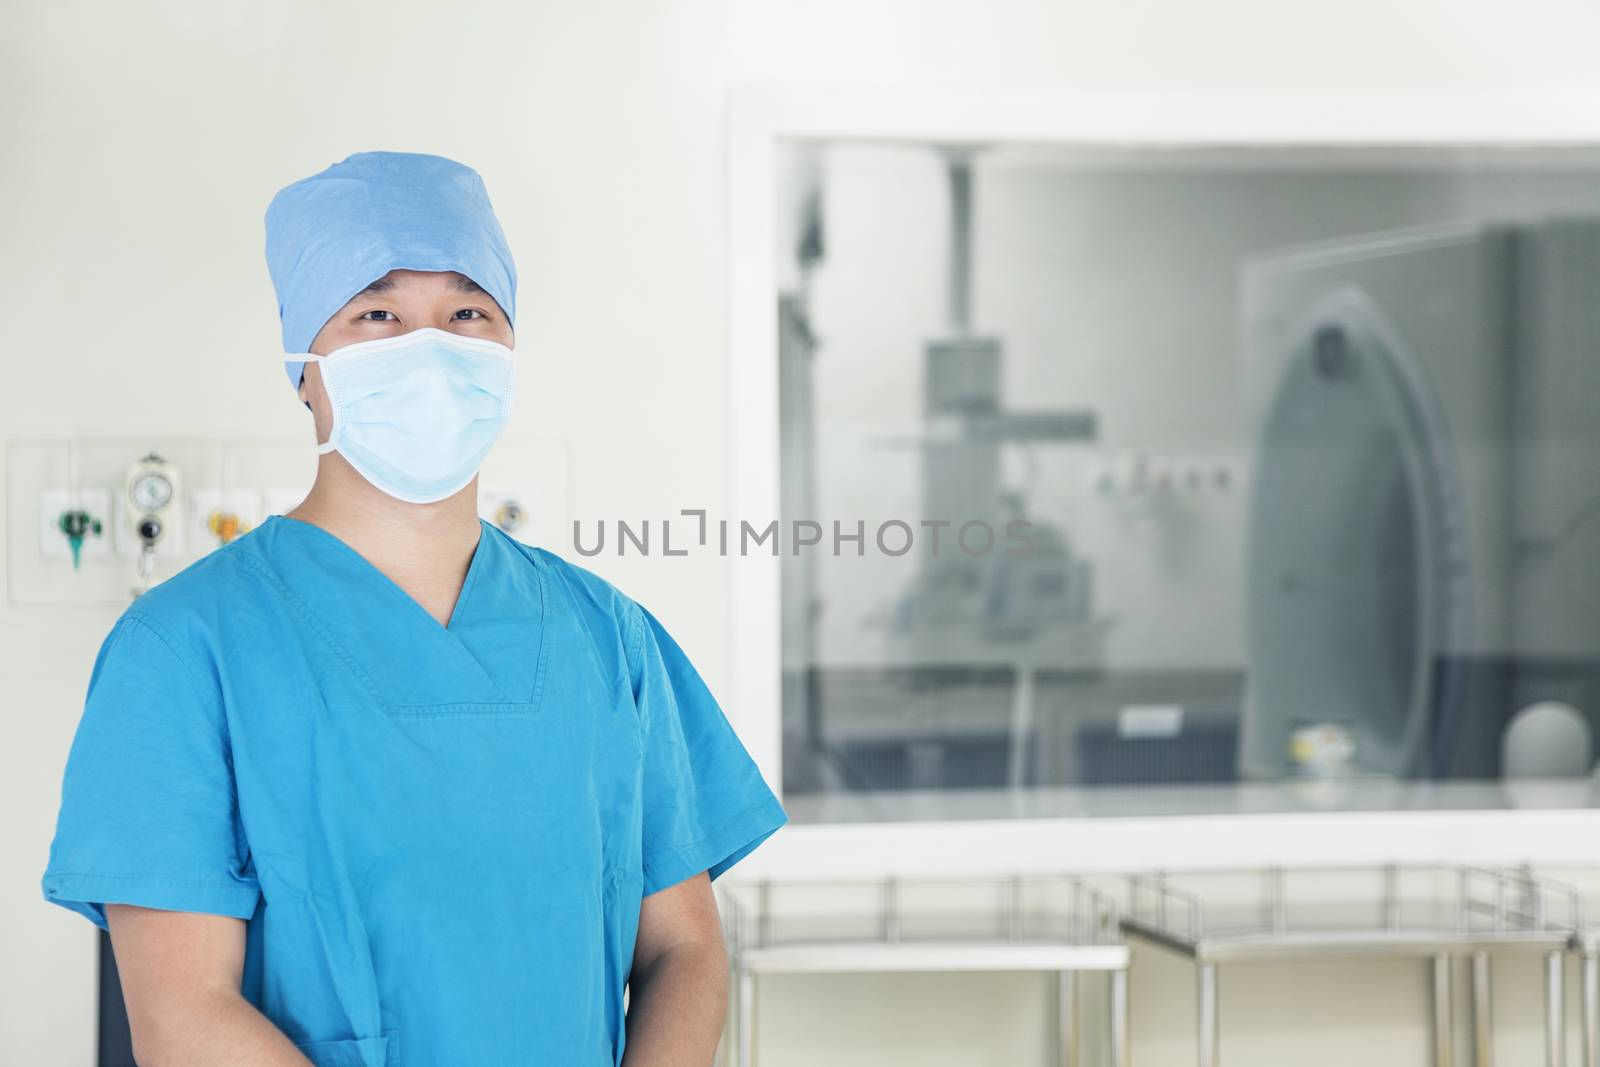 Portrait of young surgeon wearing surgical mask in the operating room